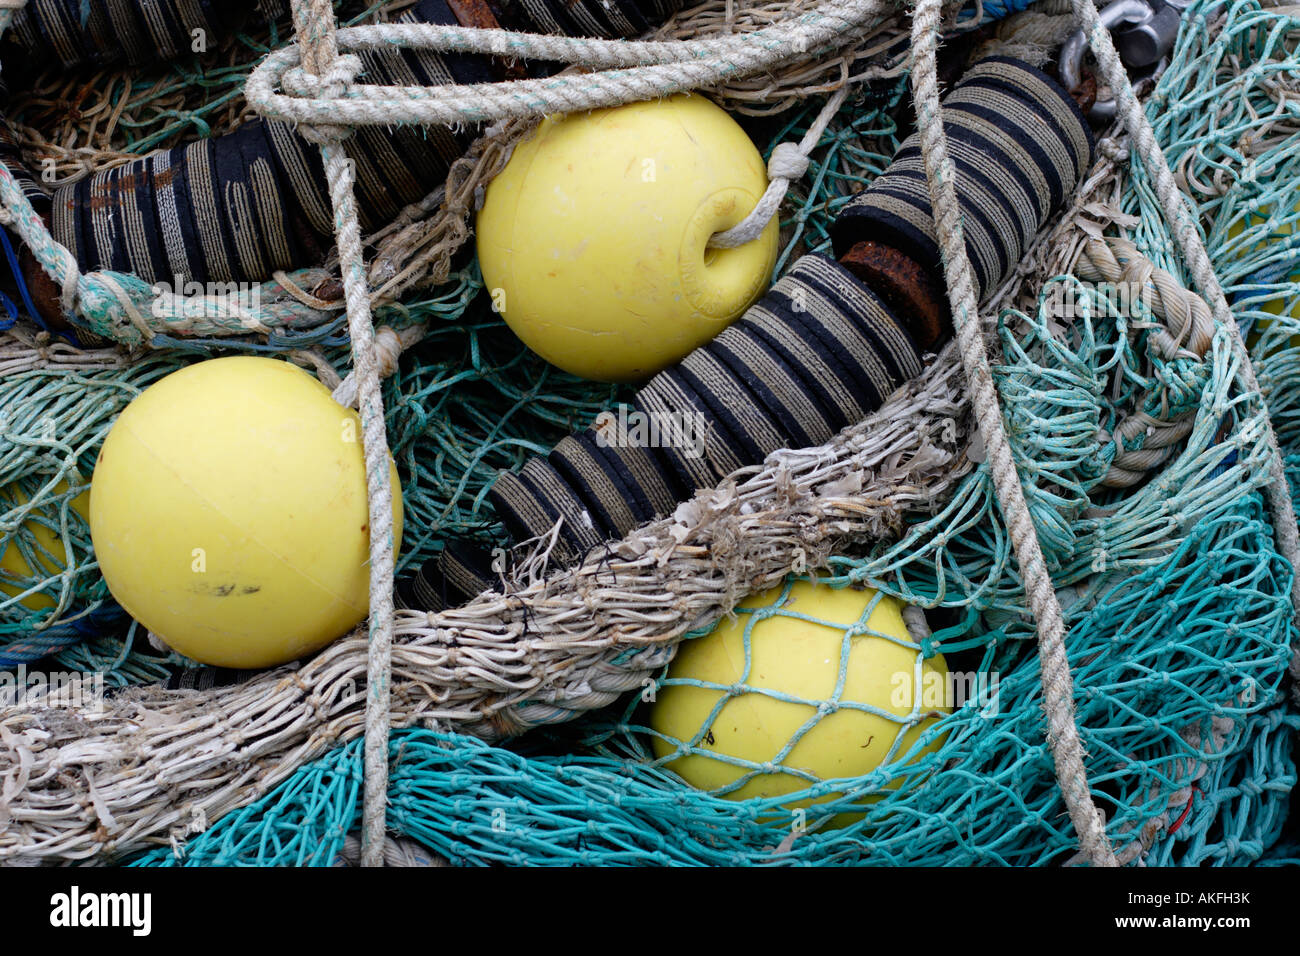 Detail of three yellow flotation buoys and commercial fishing nets Stock Photo